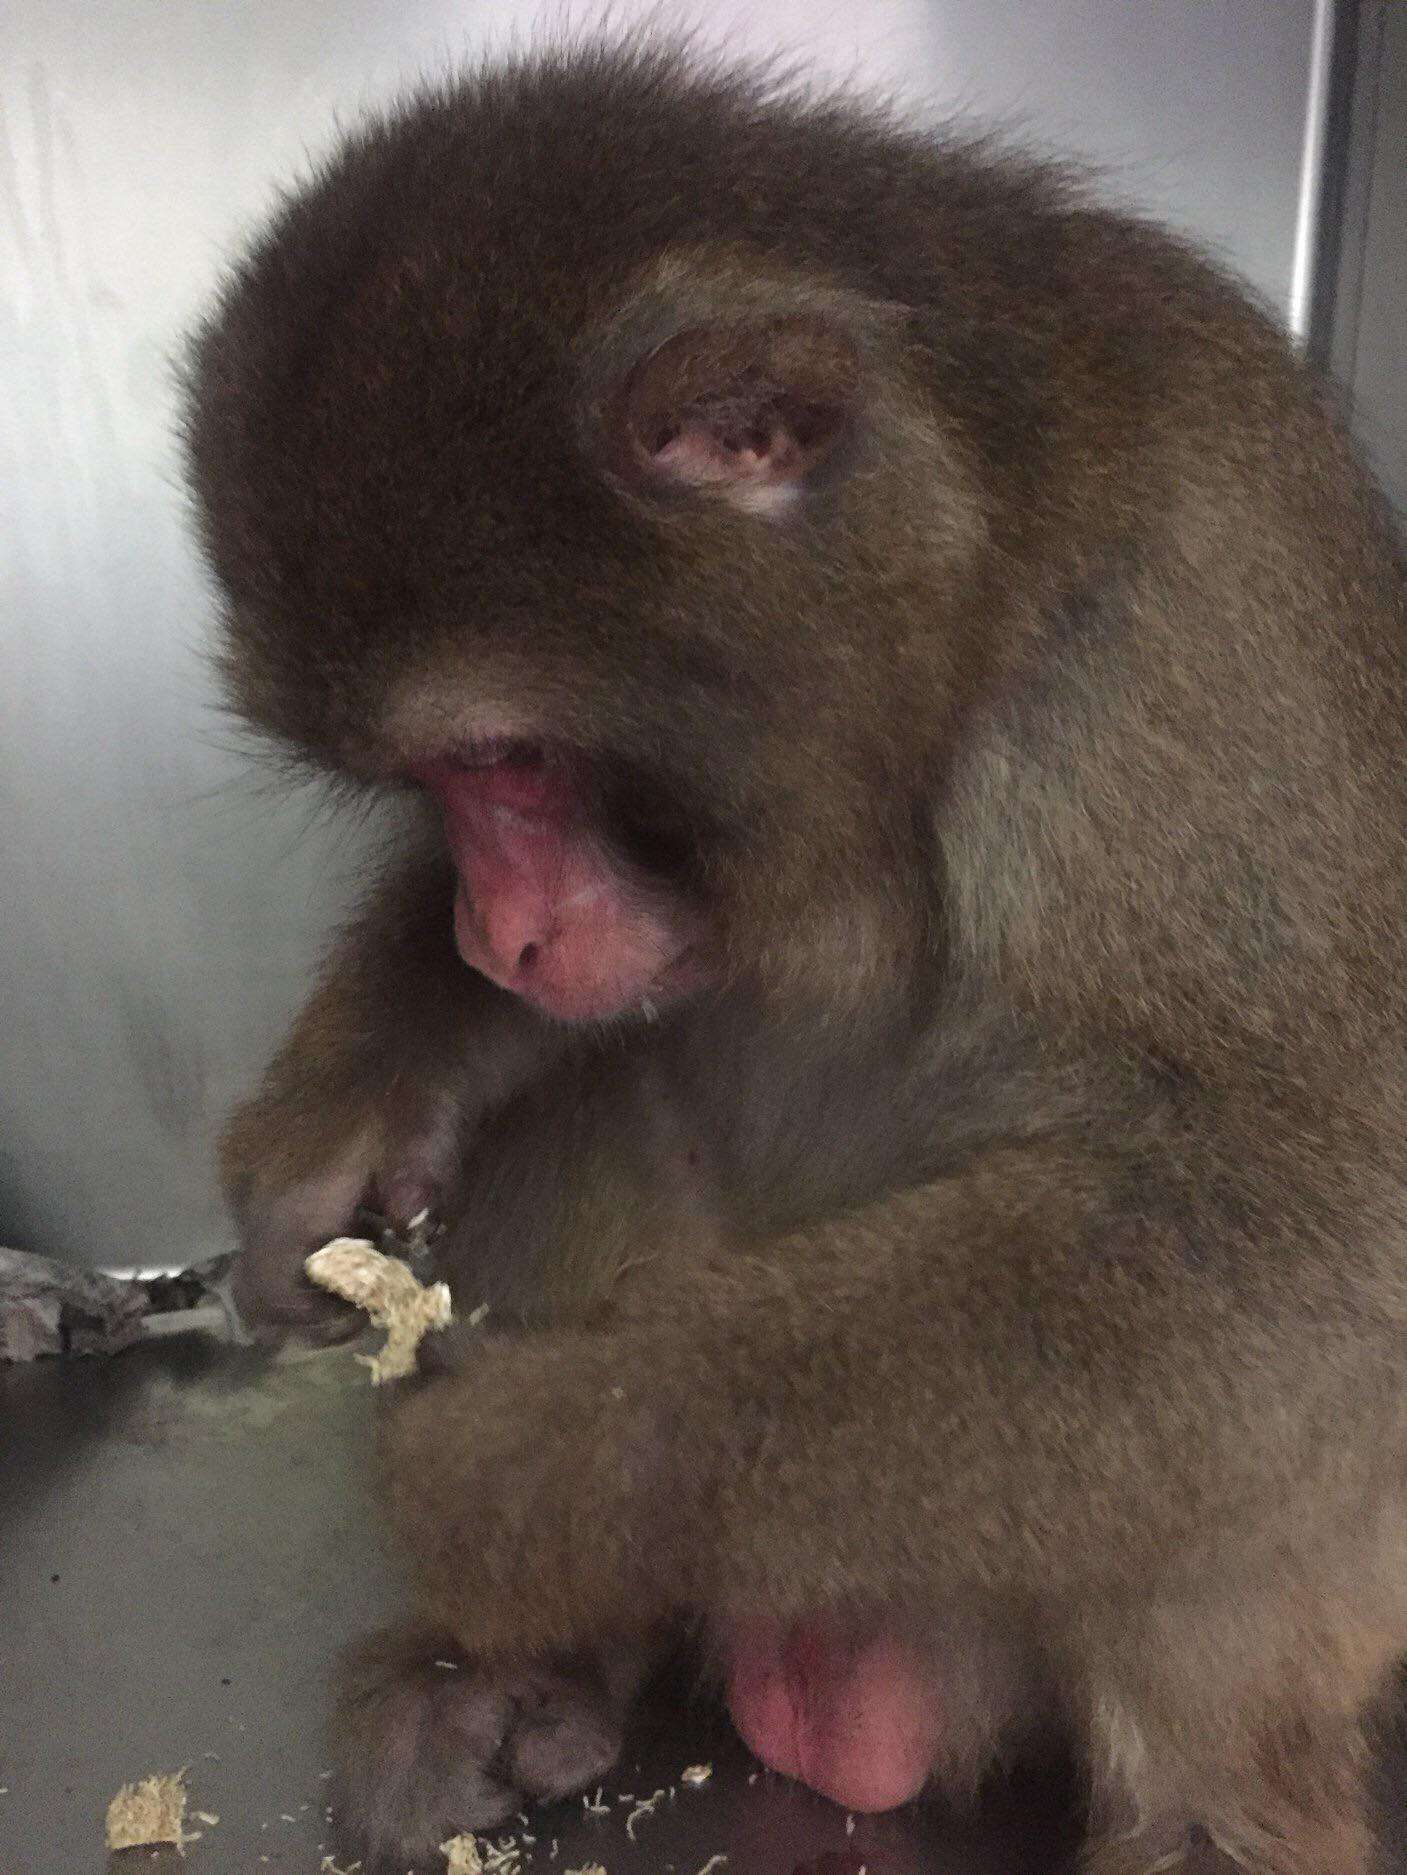 'Pet' macaque dumped at Texas shelter